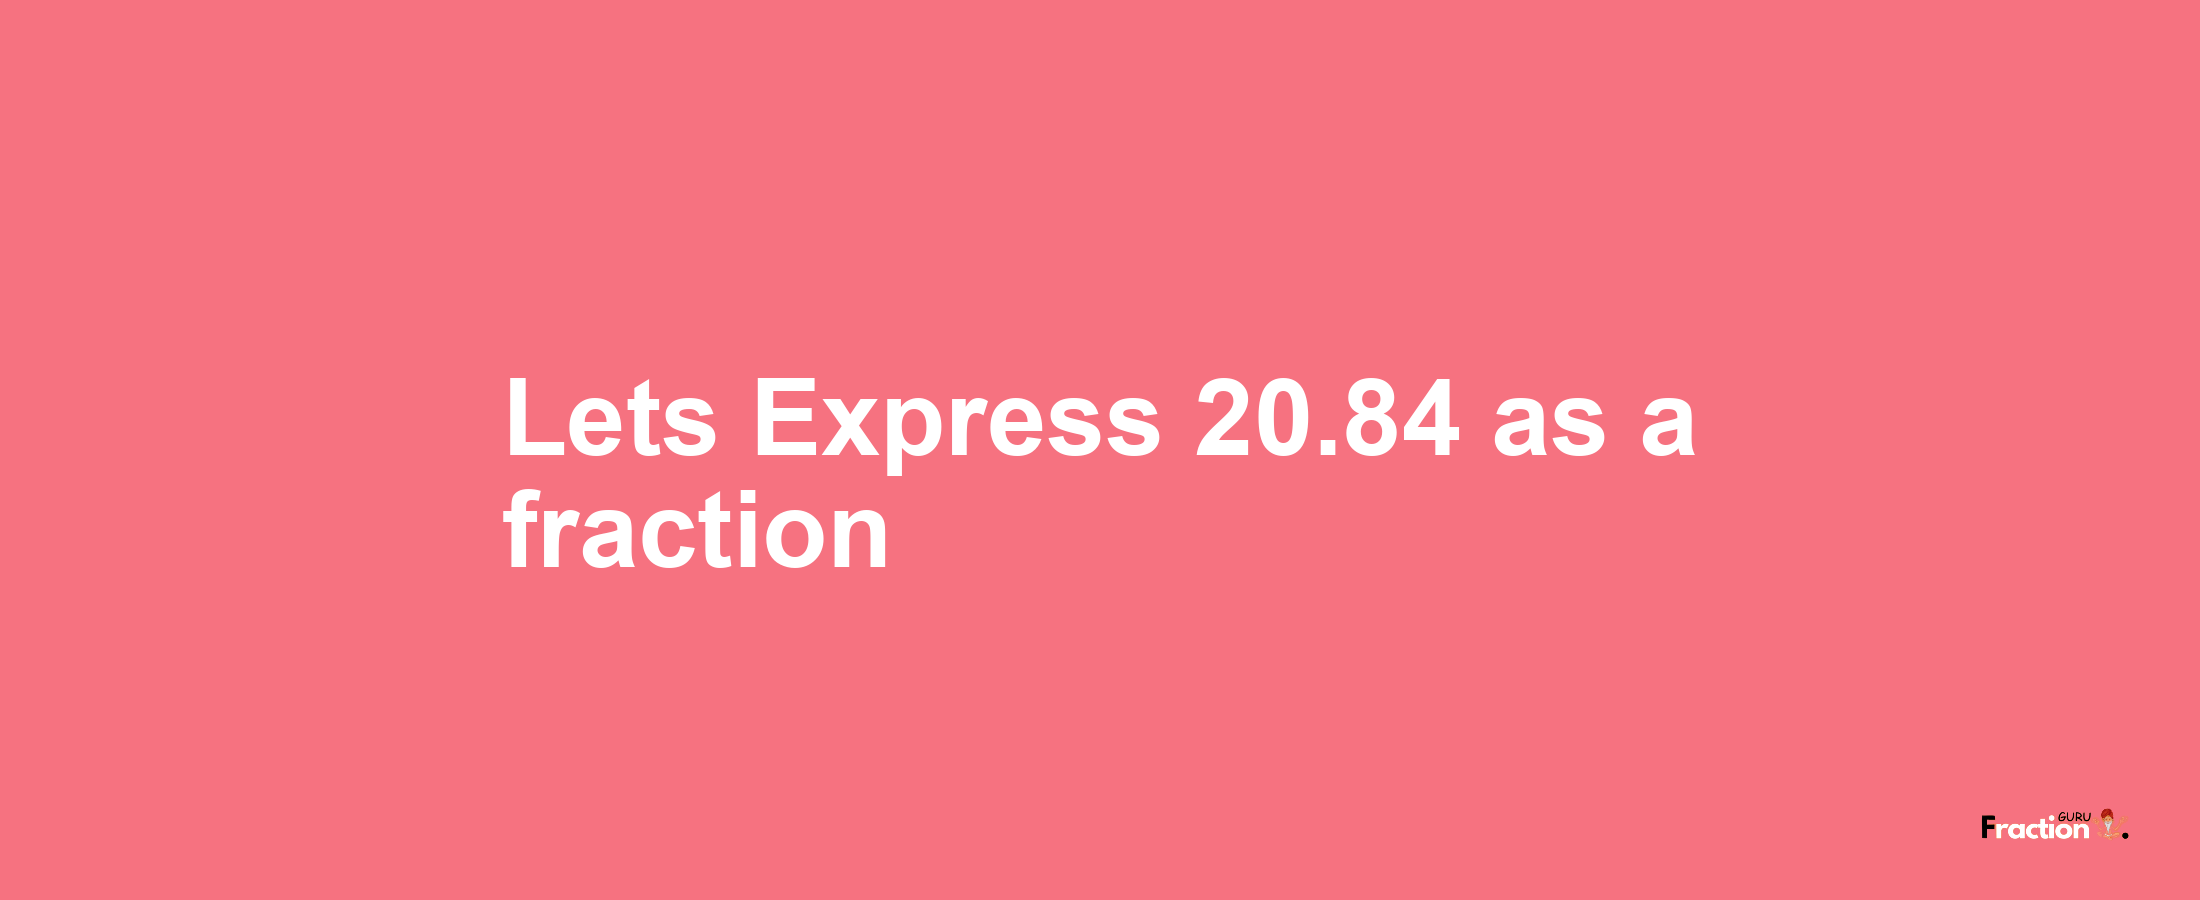 Lets Express 20.84 as afraction